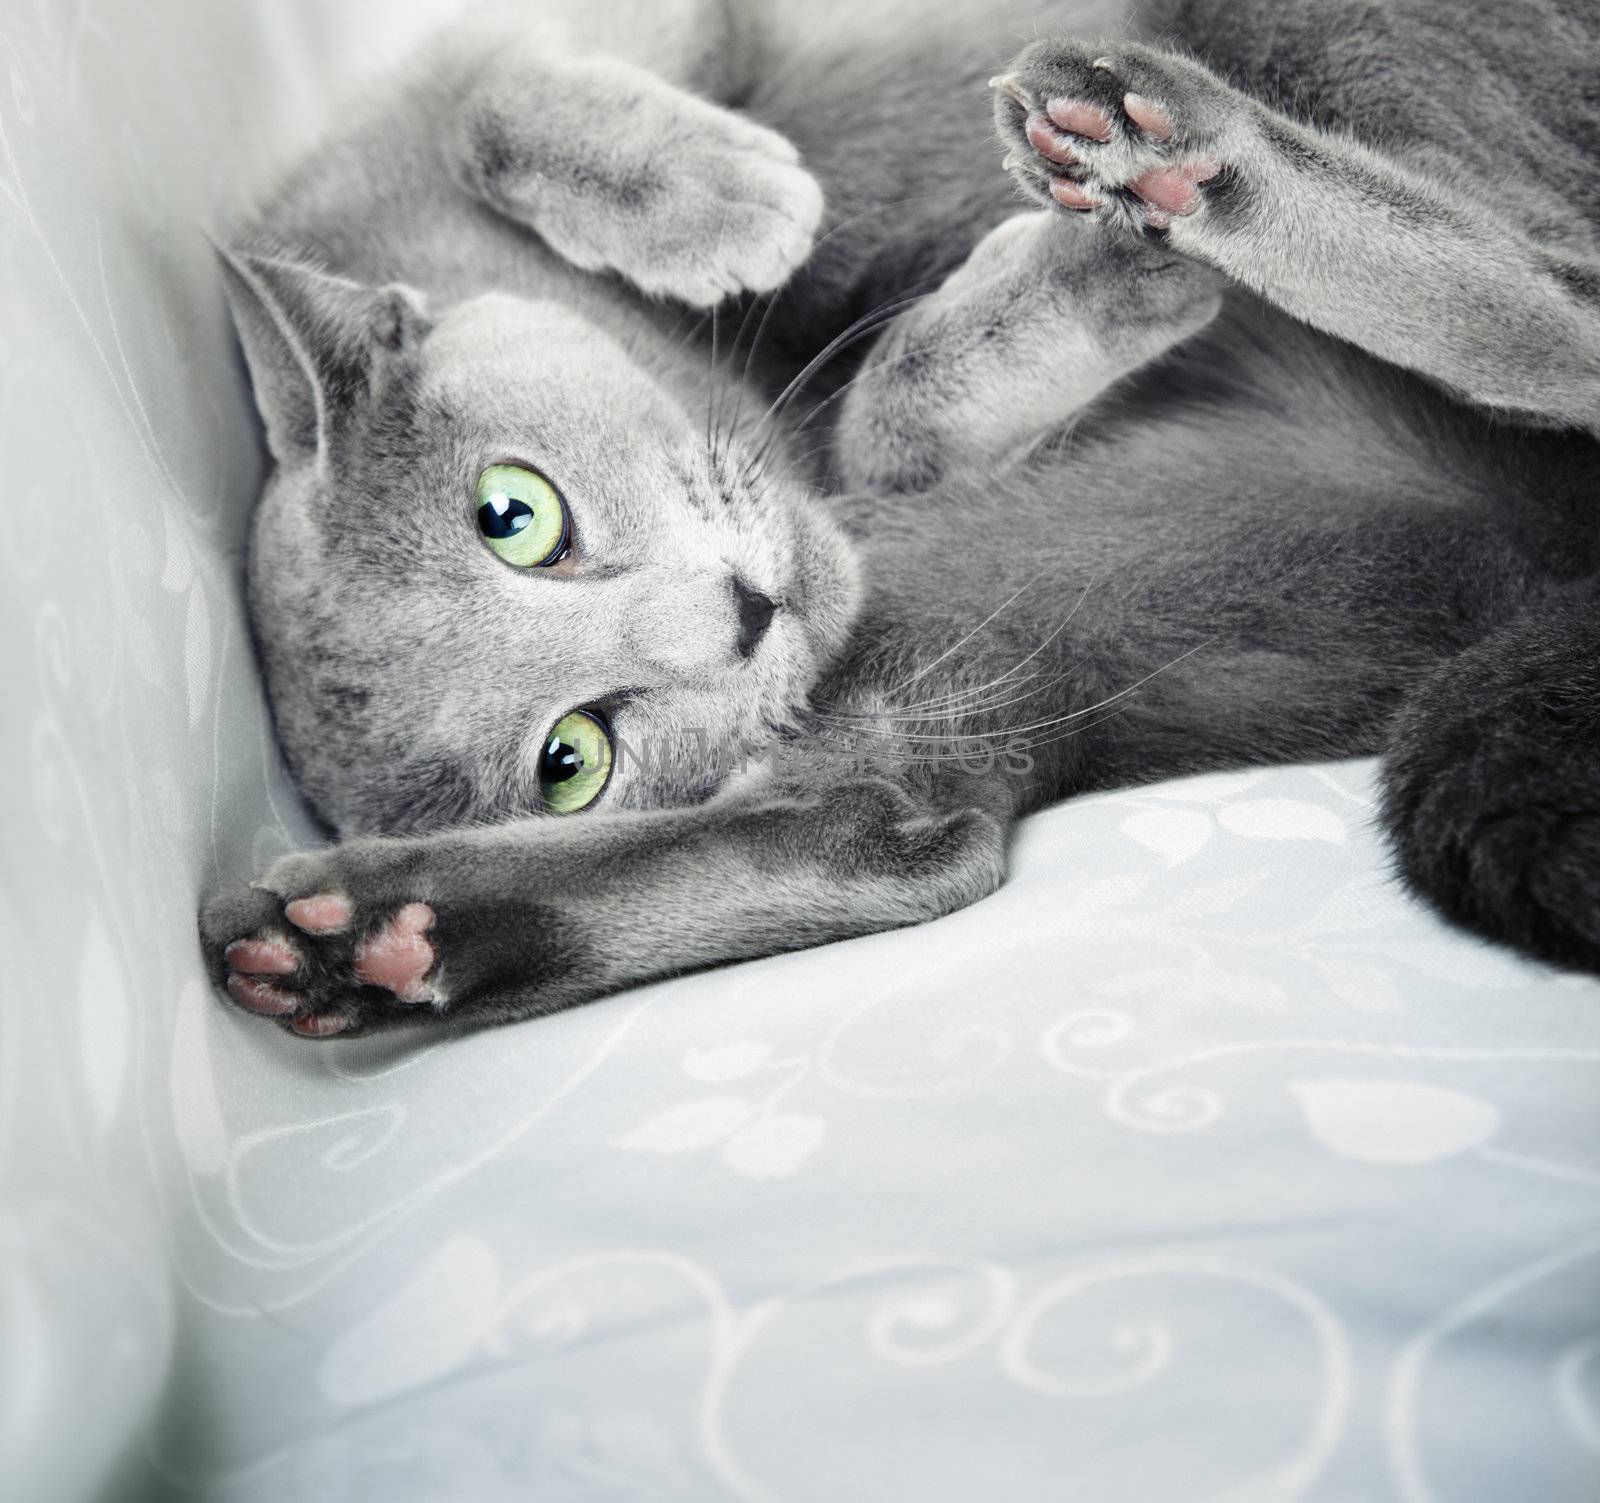 Funny cat laying indoors. Natural colors. Close-up photo